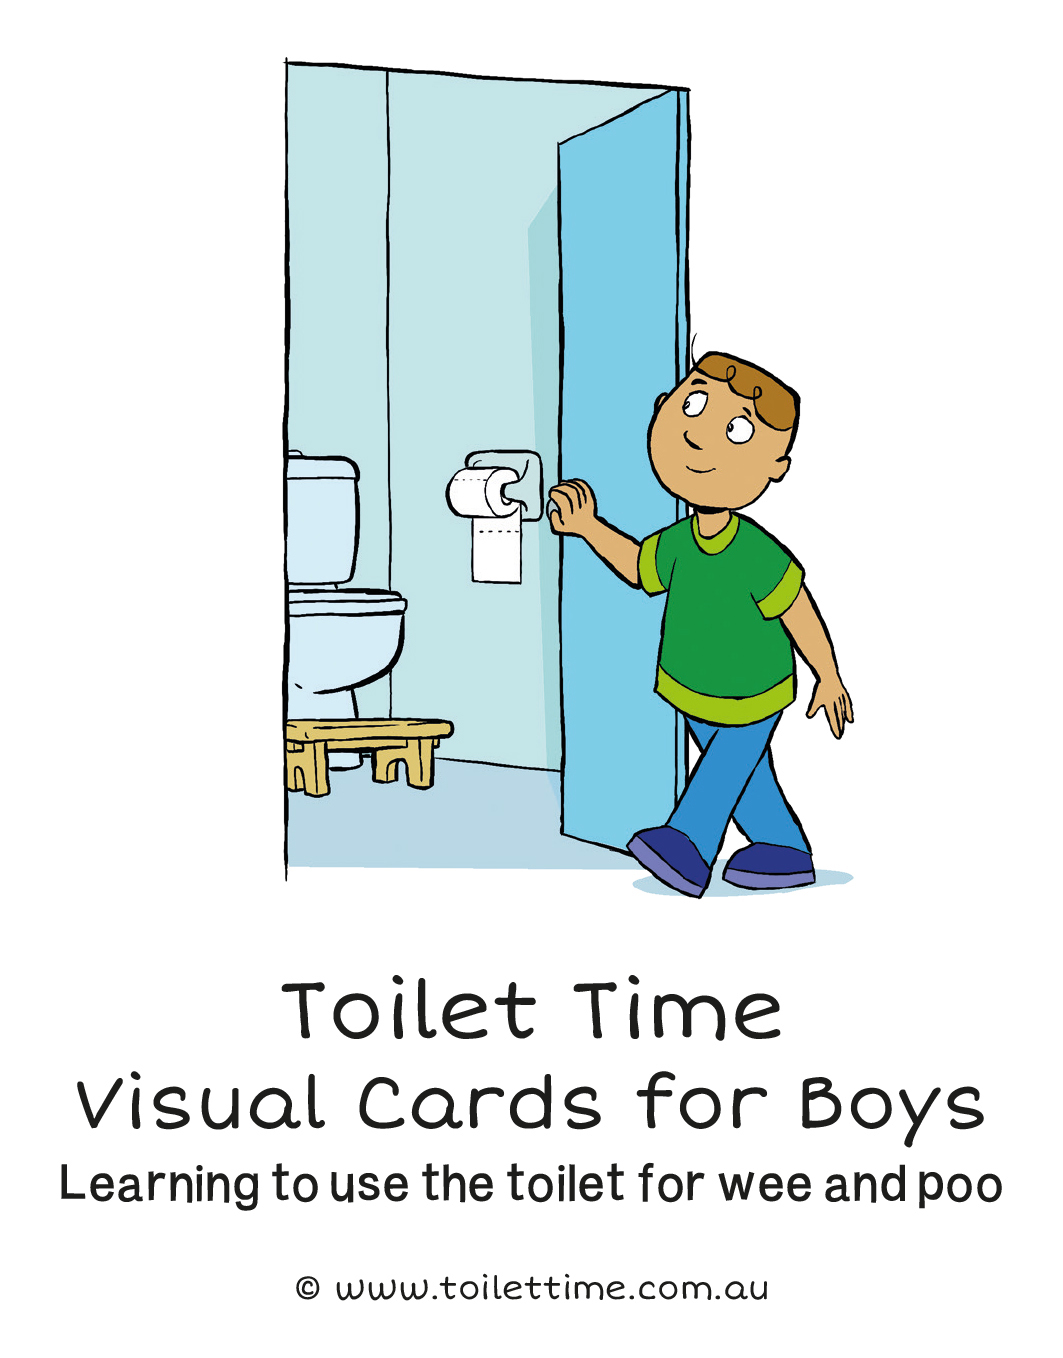 Boys Toilet Time set: A story for boys learning to use the toilet for wee and poo